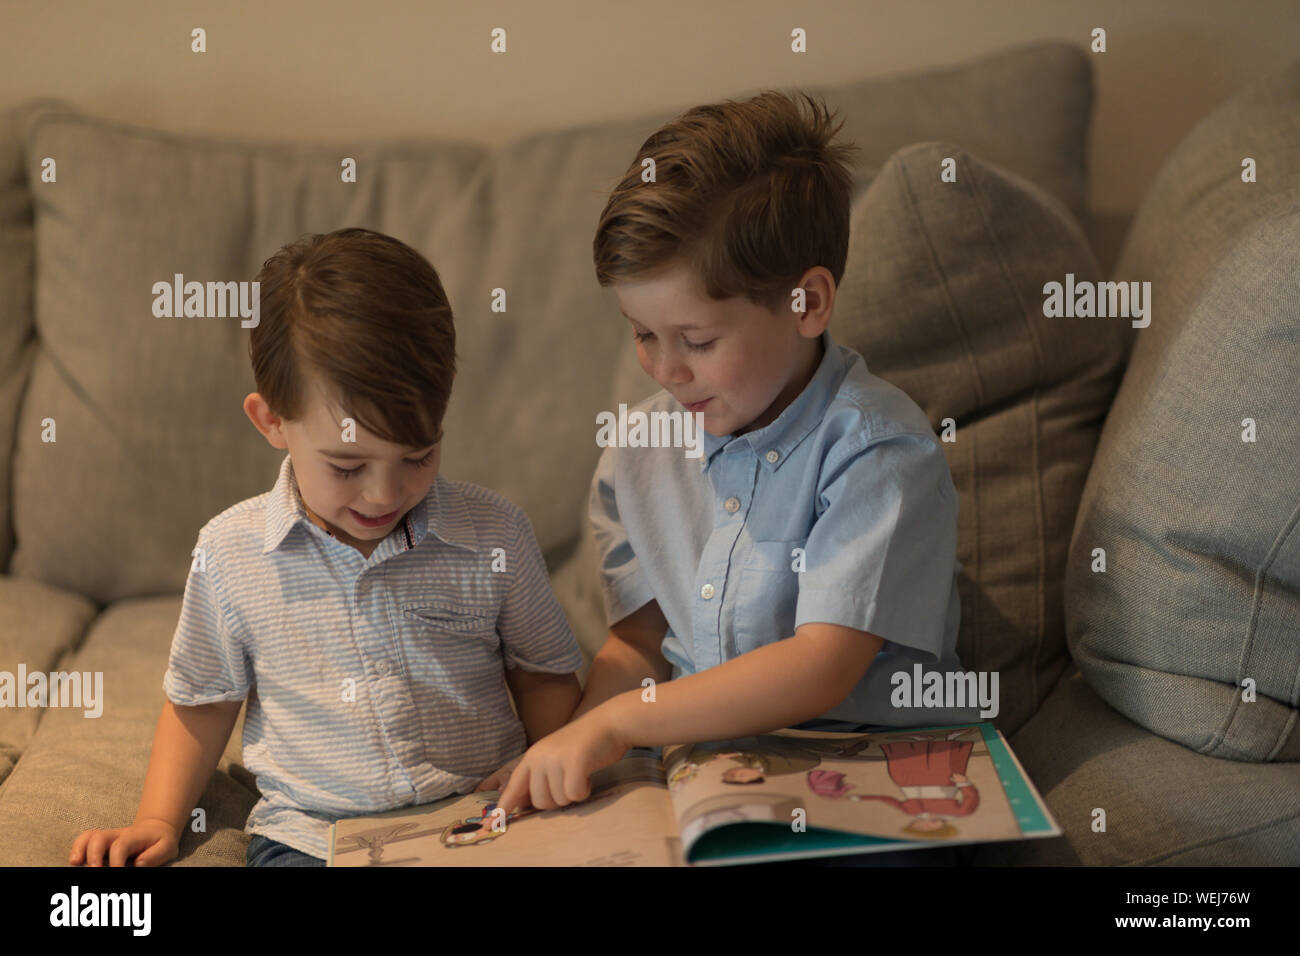 Two brothers, 2 and 4, sitting on sofa looking at book together, Clearwater, Florida Stock Photo